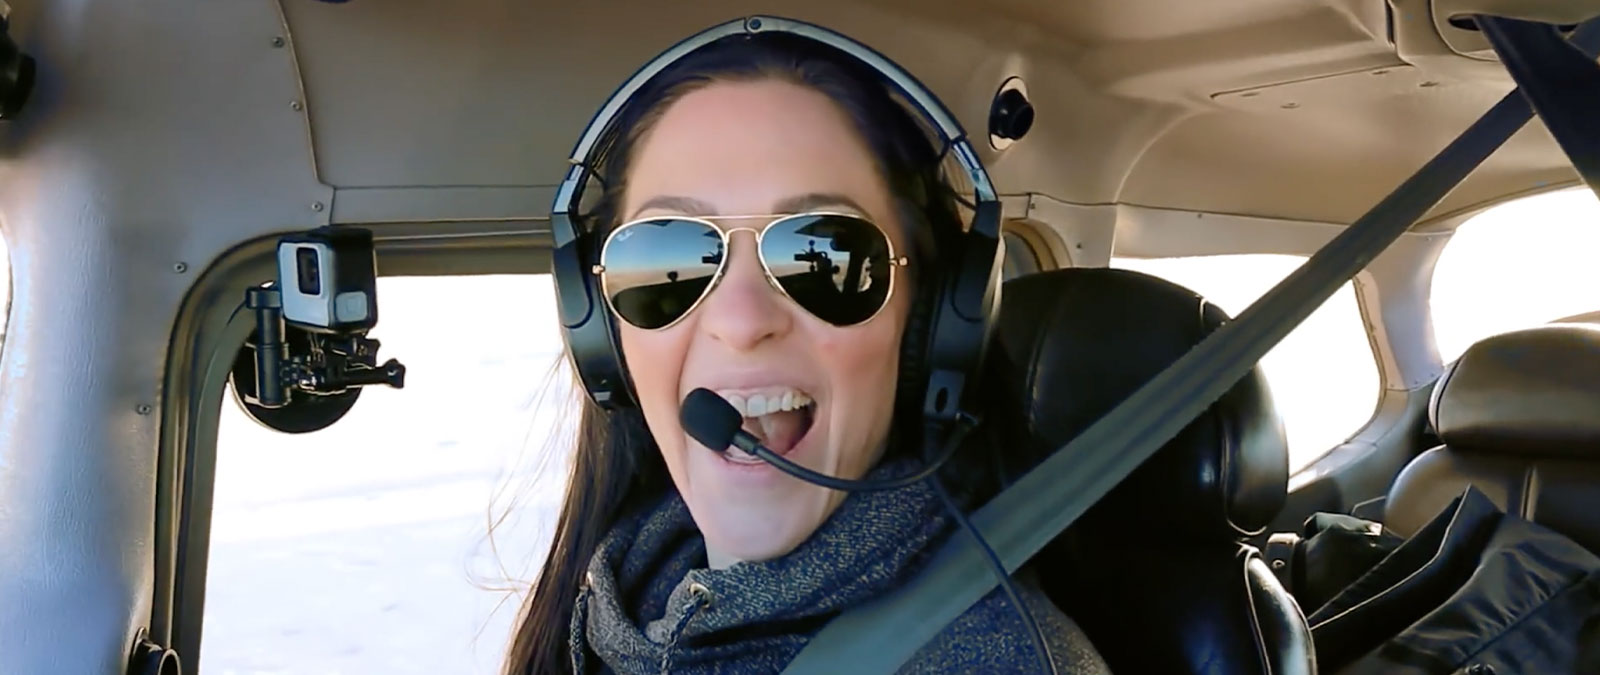 Pilot Emilie flying a plane with a headset and sunglasses